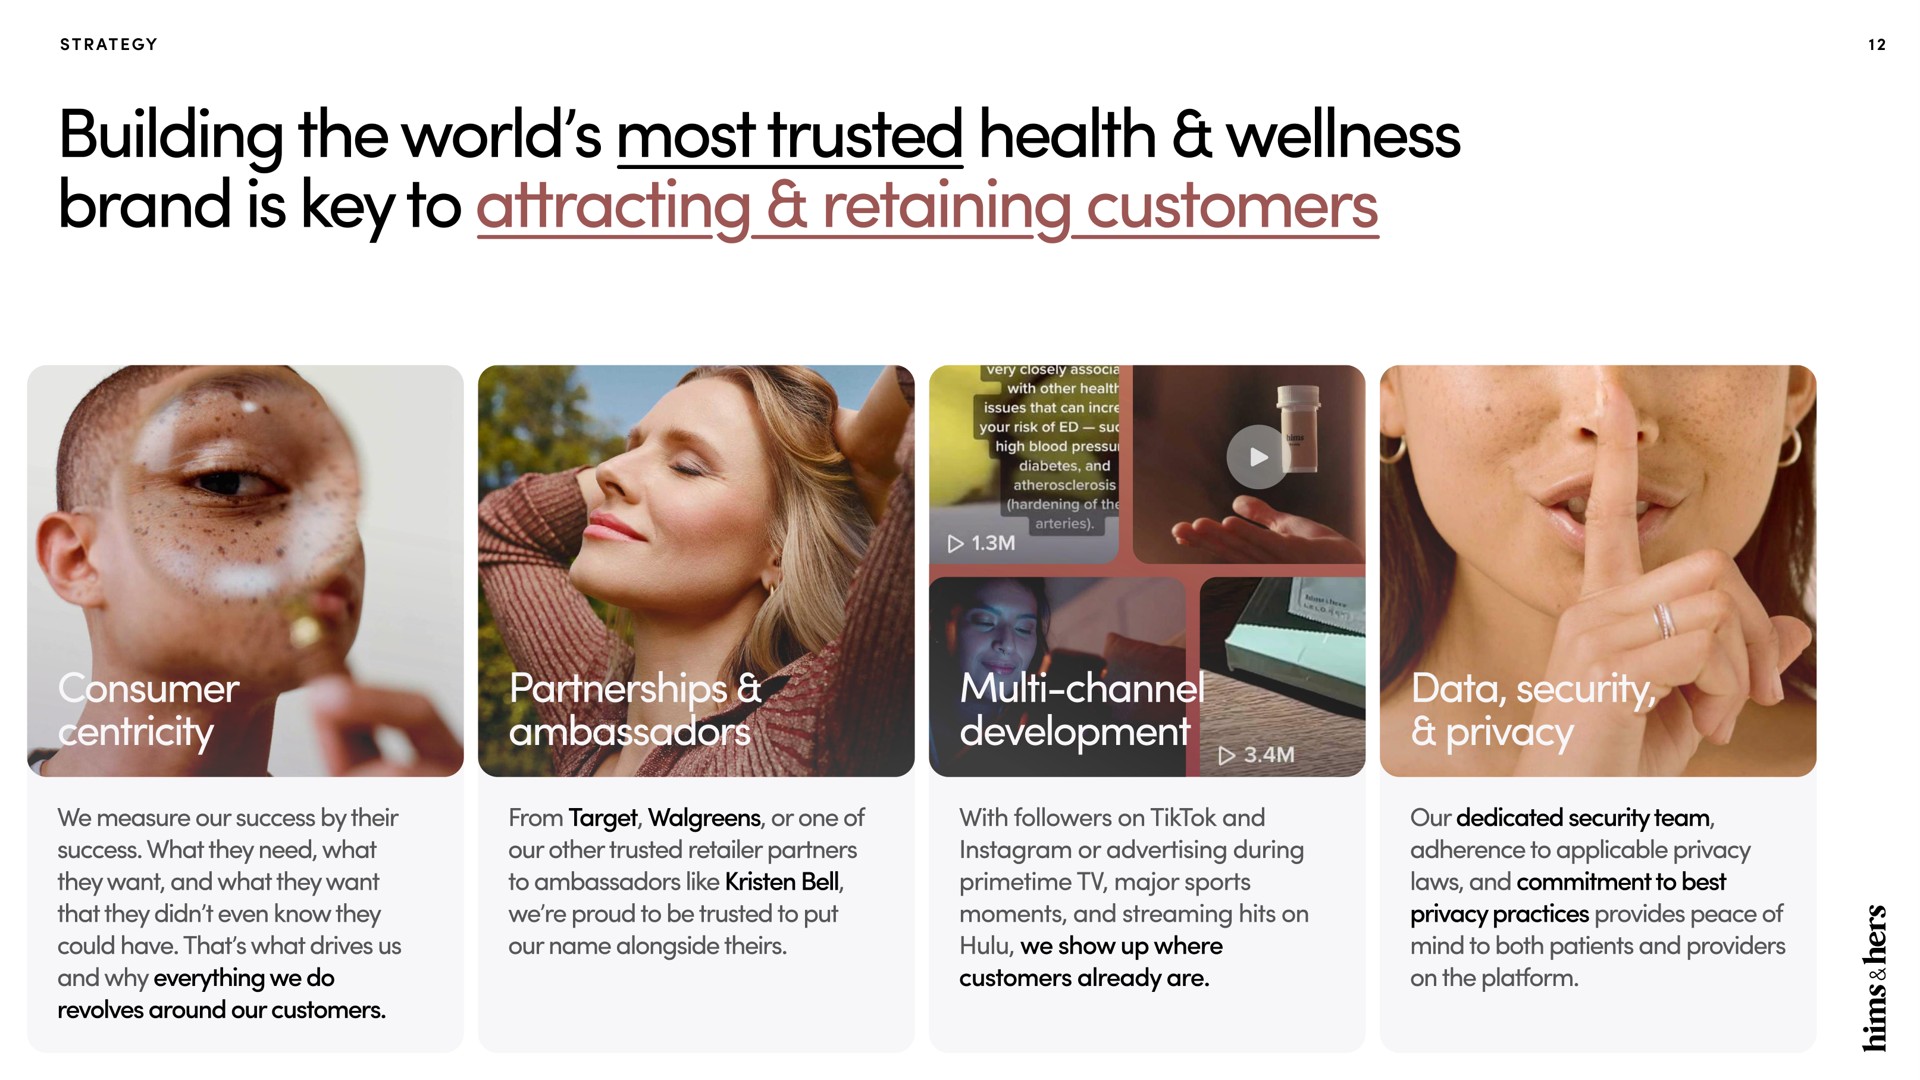 building the world most trusted health wellness brand is key to attracting retaining customers | Hims & Hers